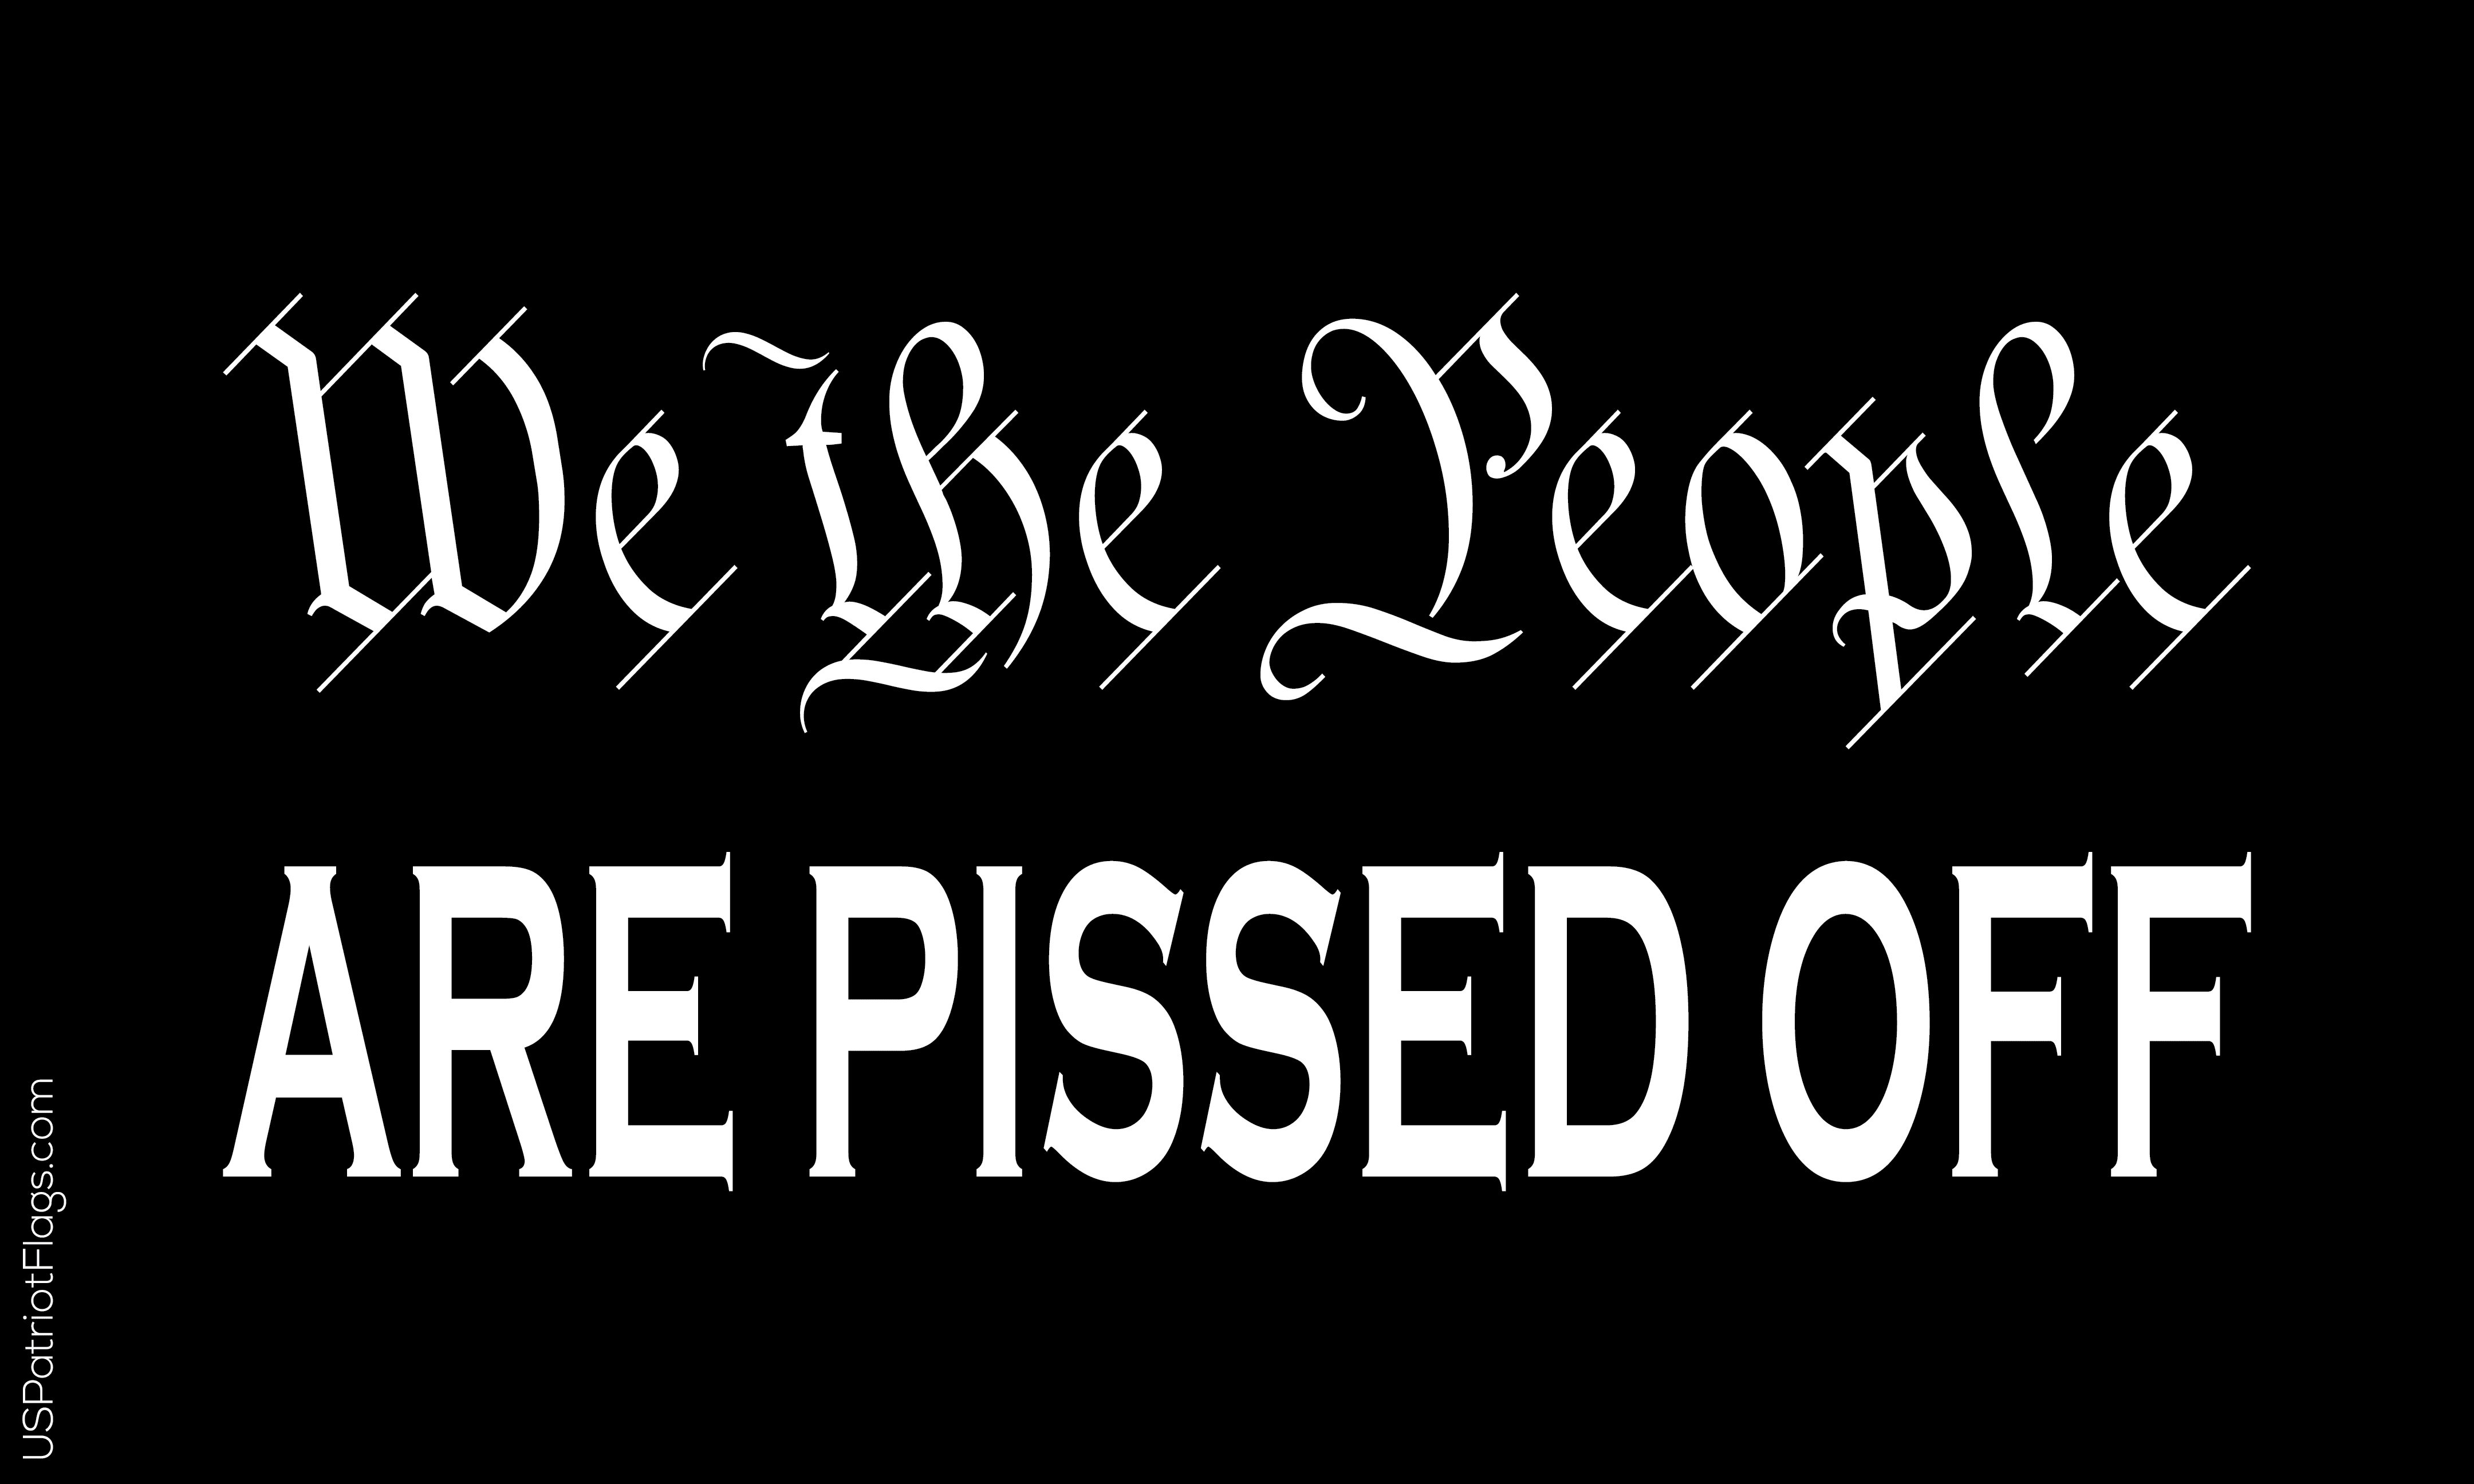 We The People are Pissed Off Flag - Made in USA.